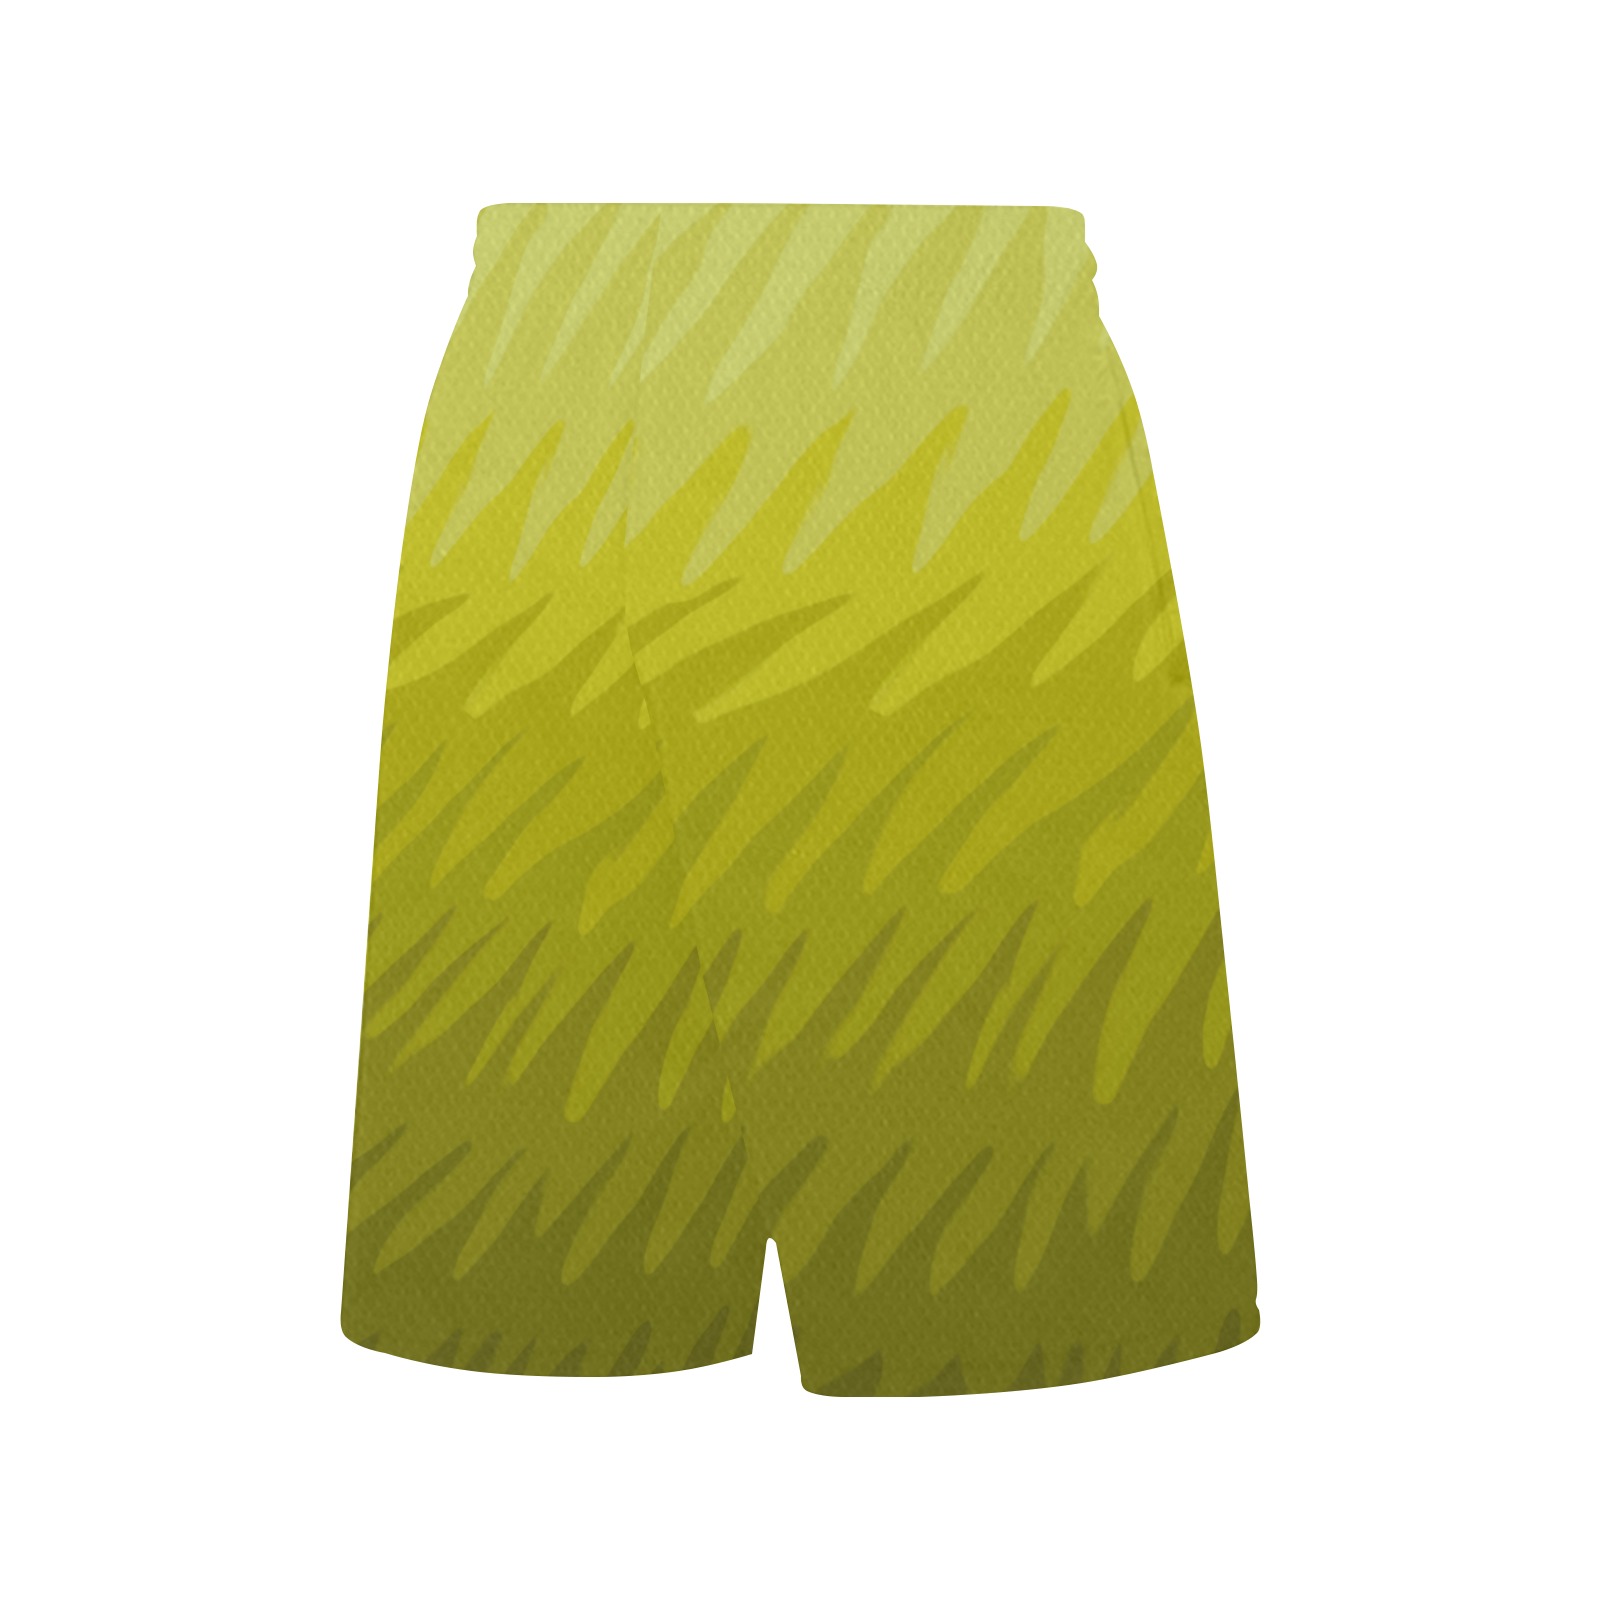 ylw wavespike All Over Print Basketball Shorts with Pocket